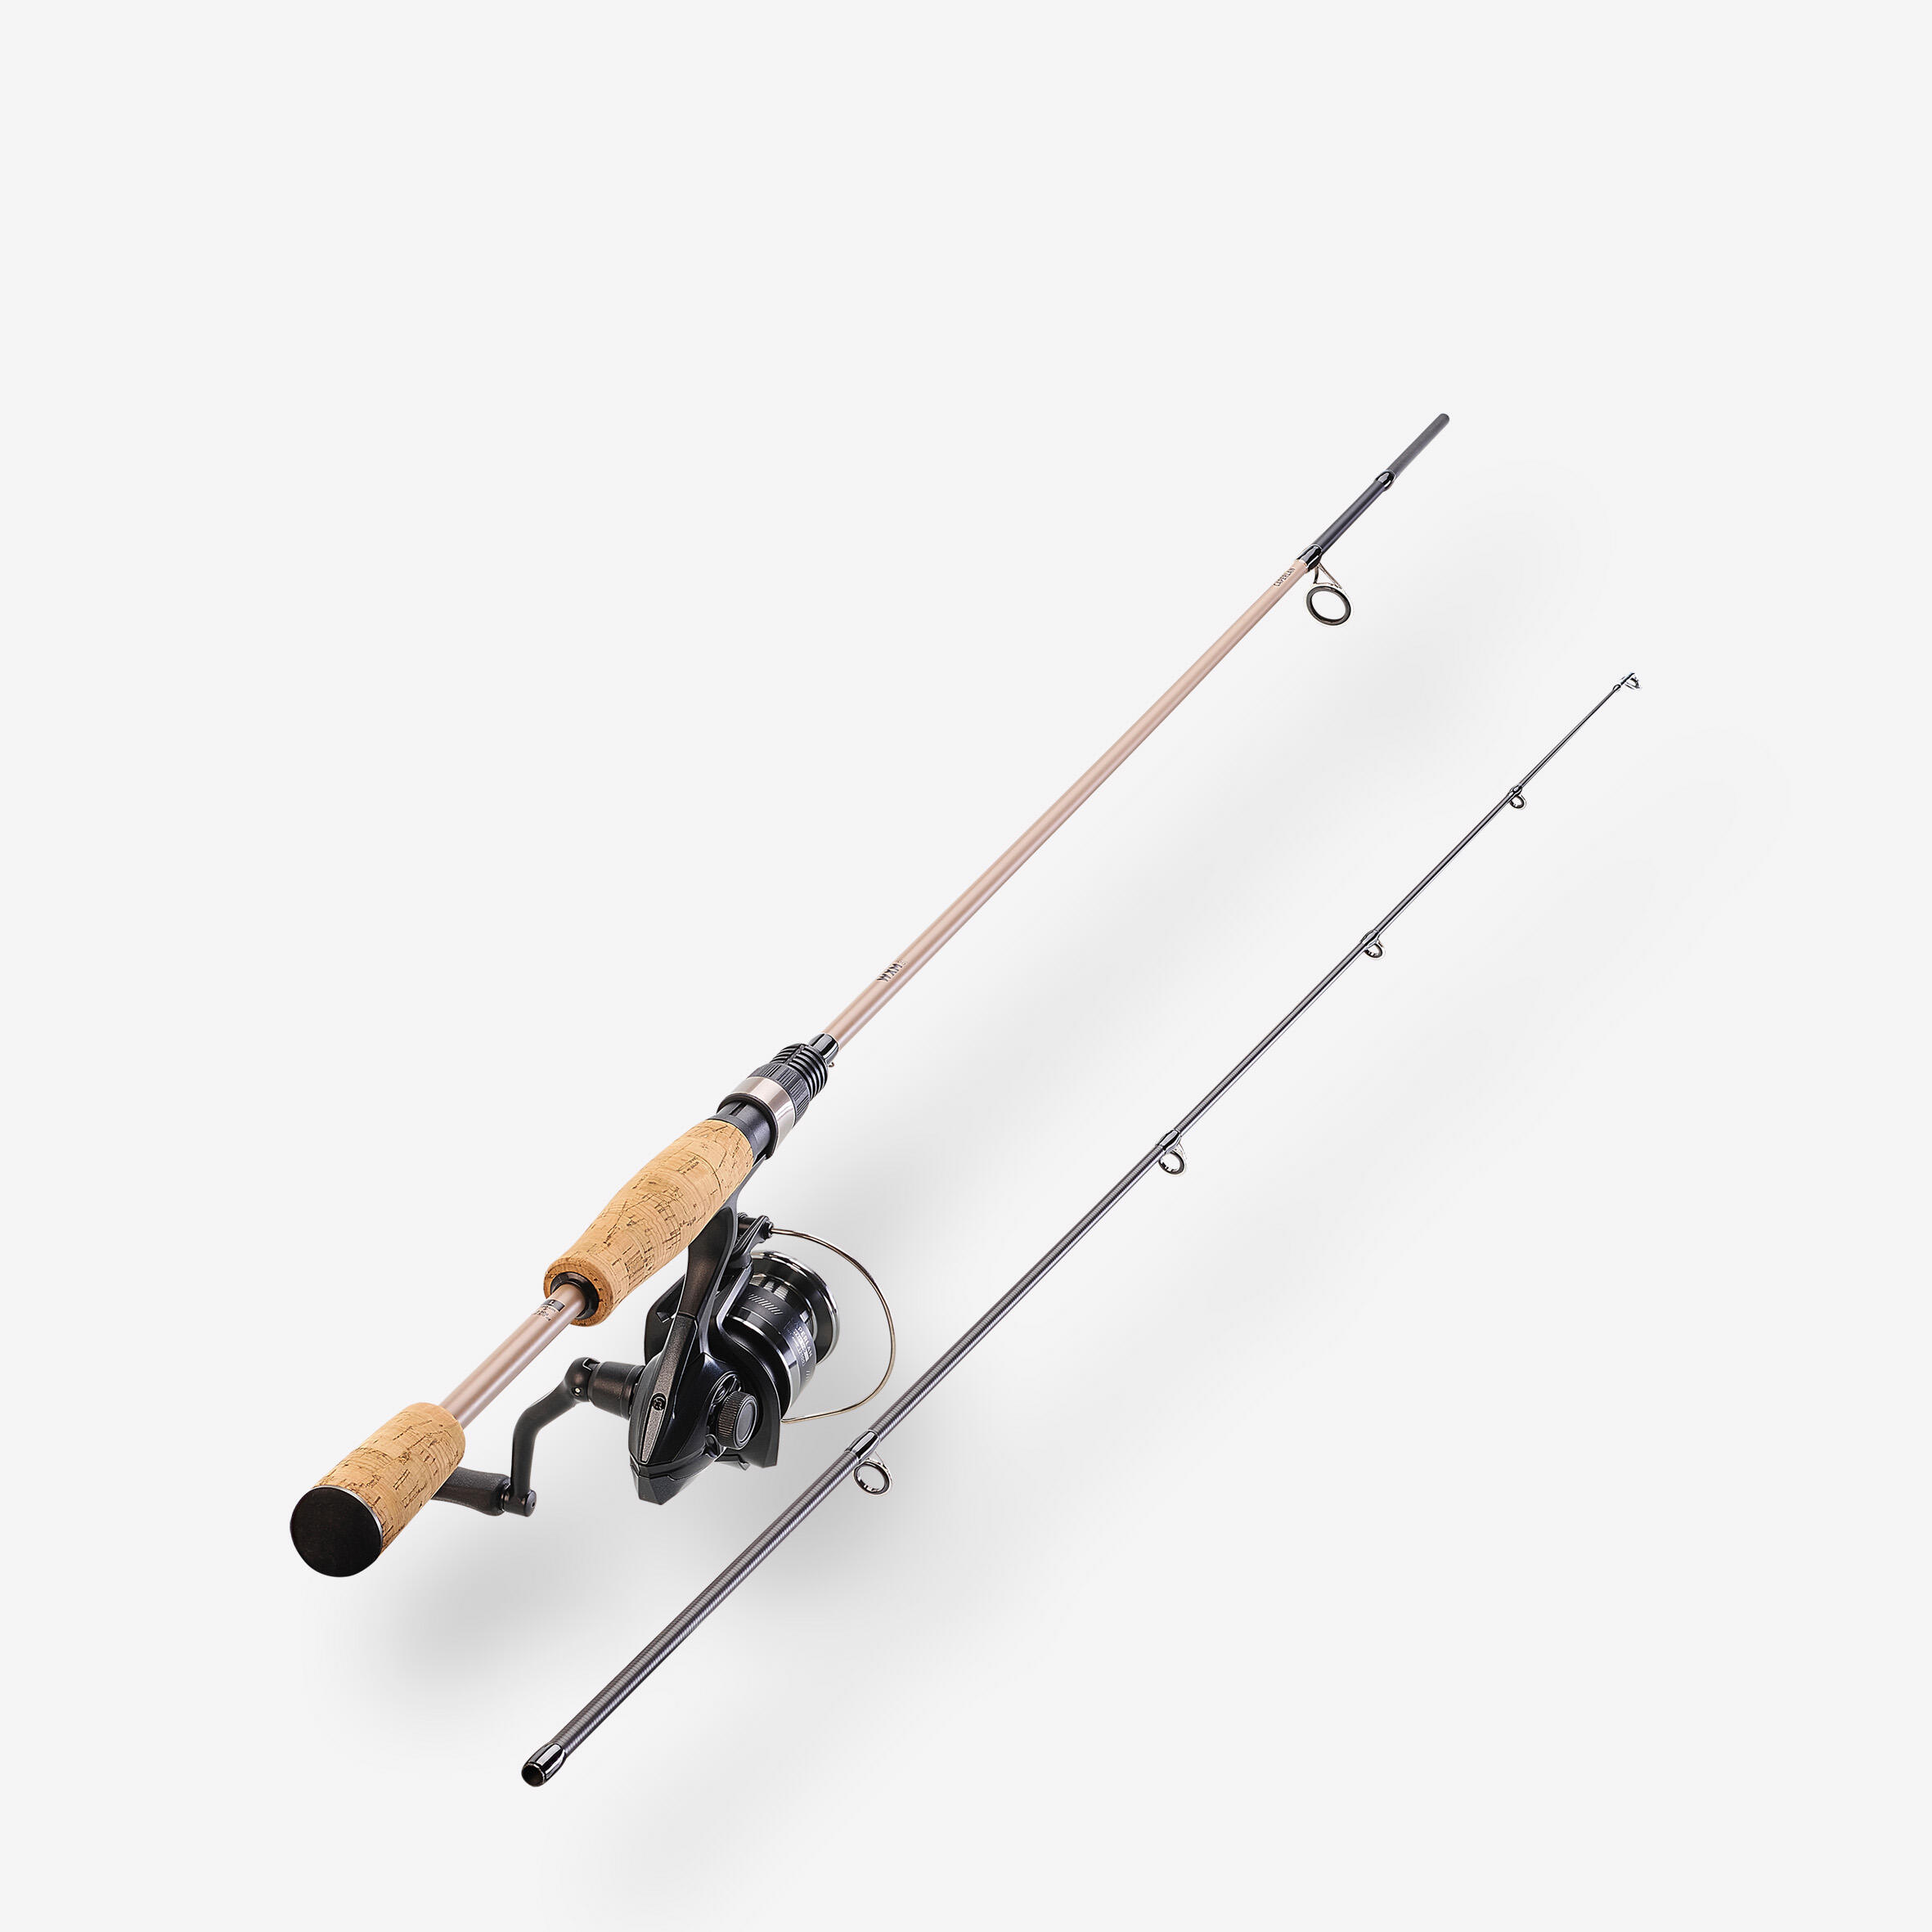 Shop for Rod and Reel Combo - Bushcraft Base Camp